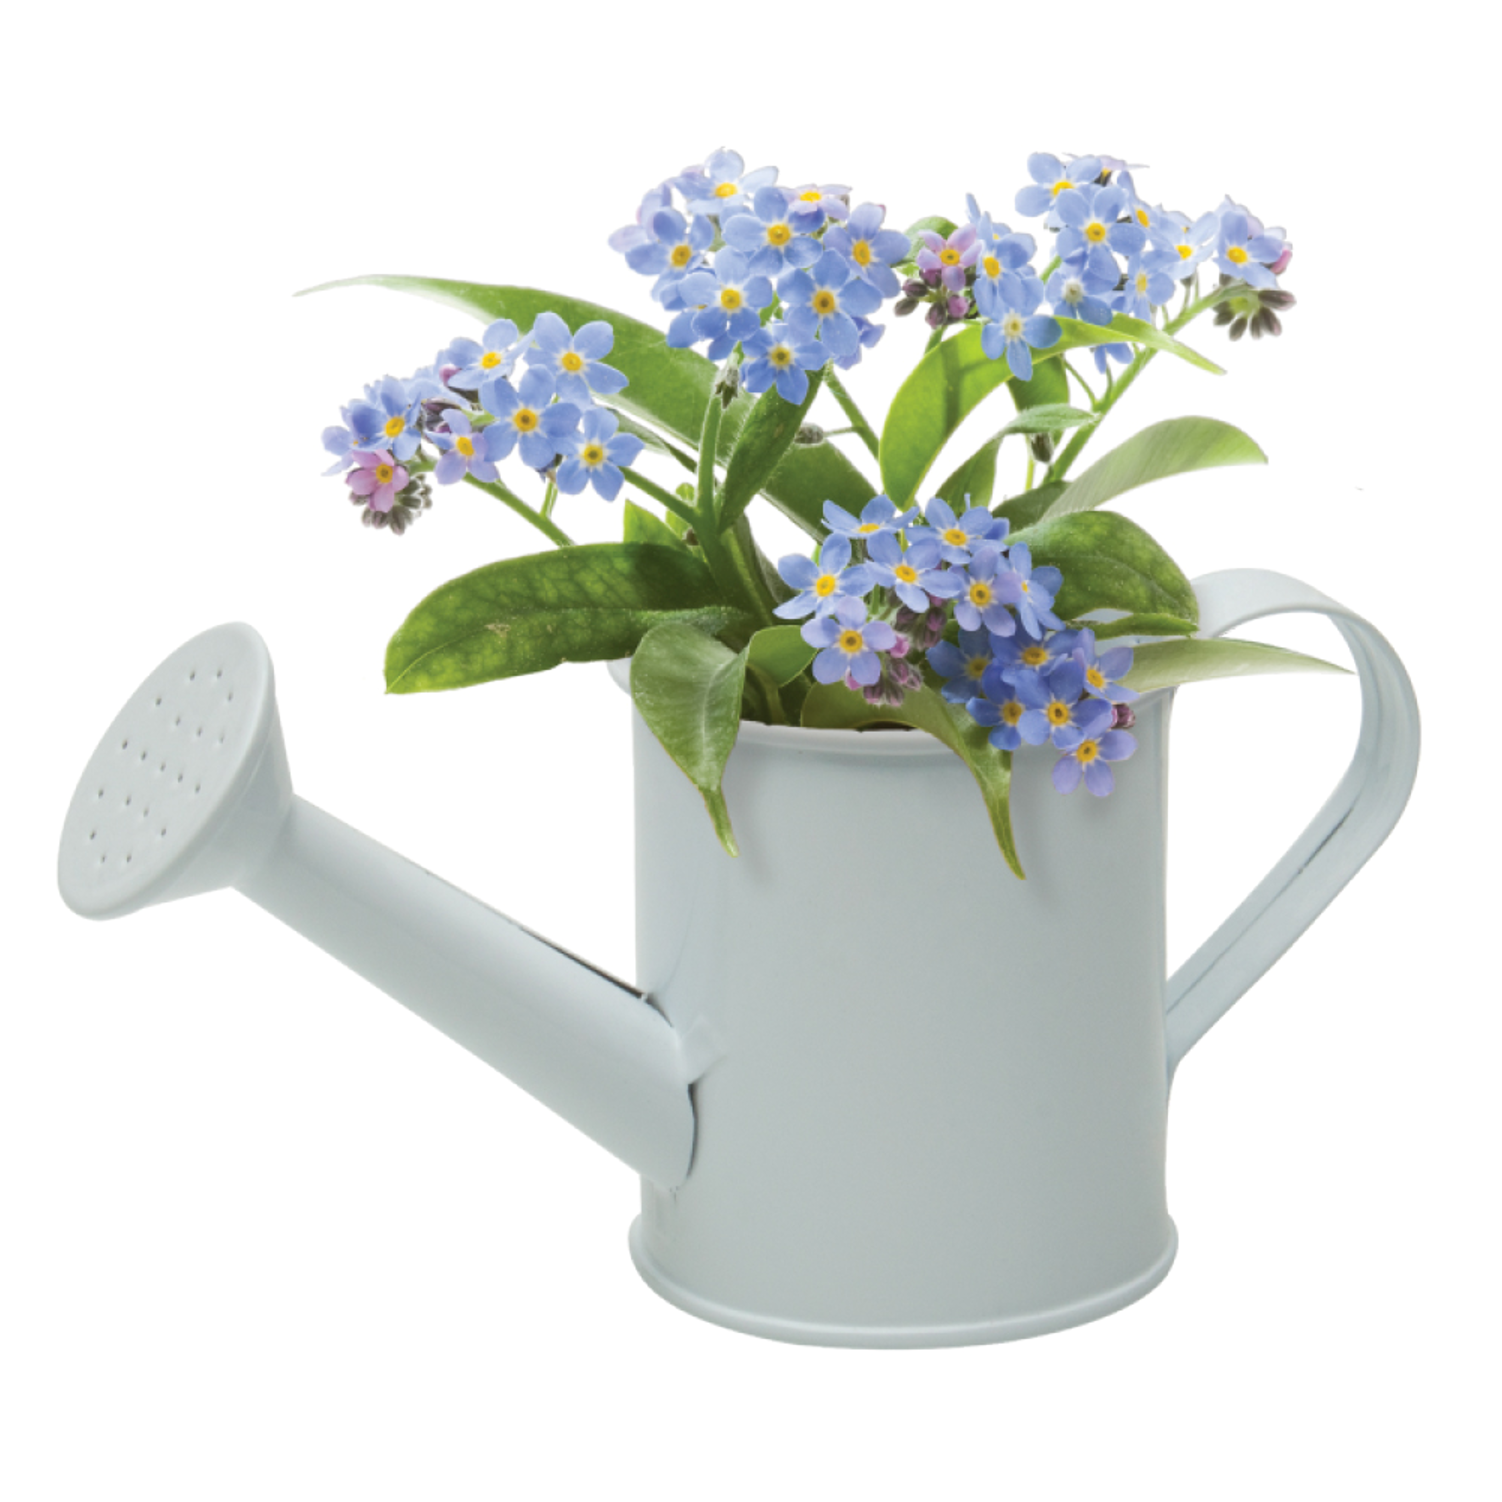 Custom Plantable Kit in Watering Can Seeded Gifts Plantable Promotion